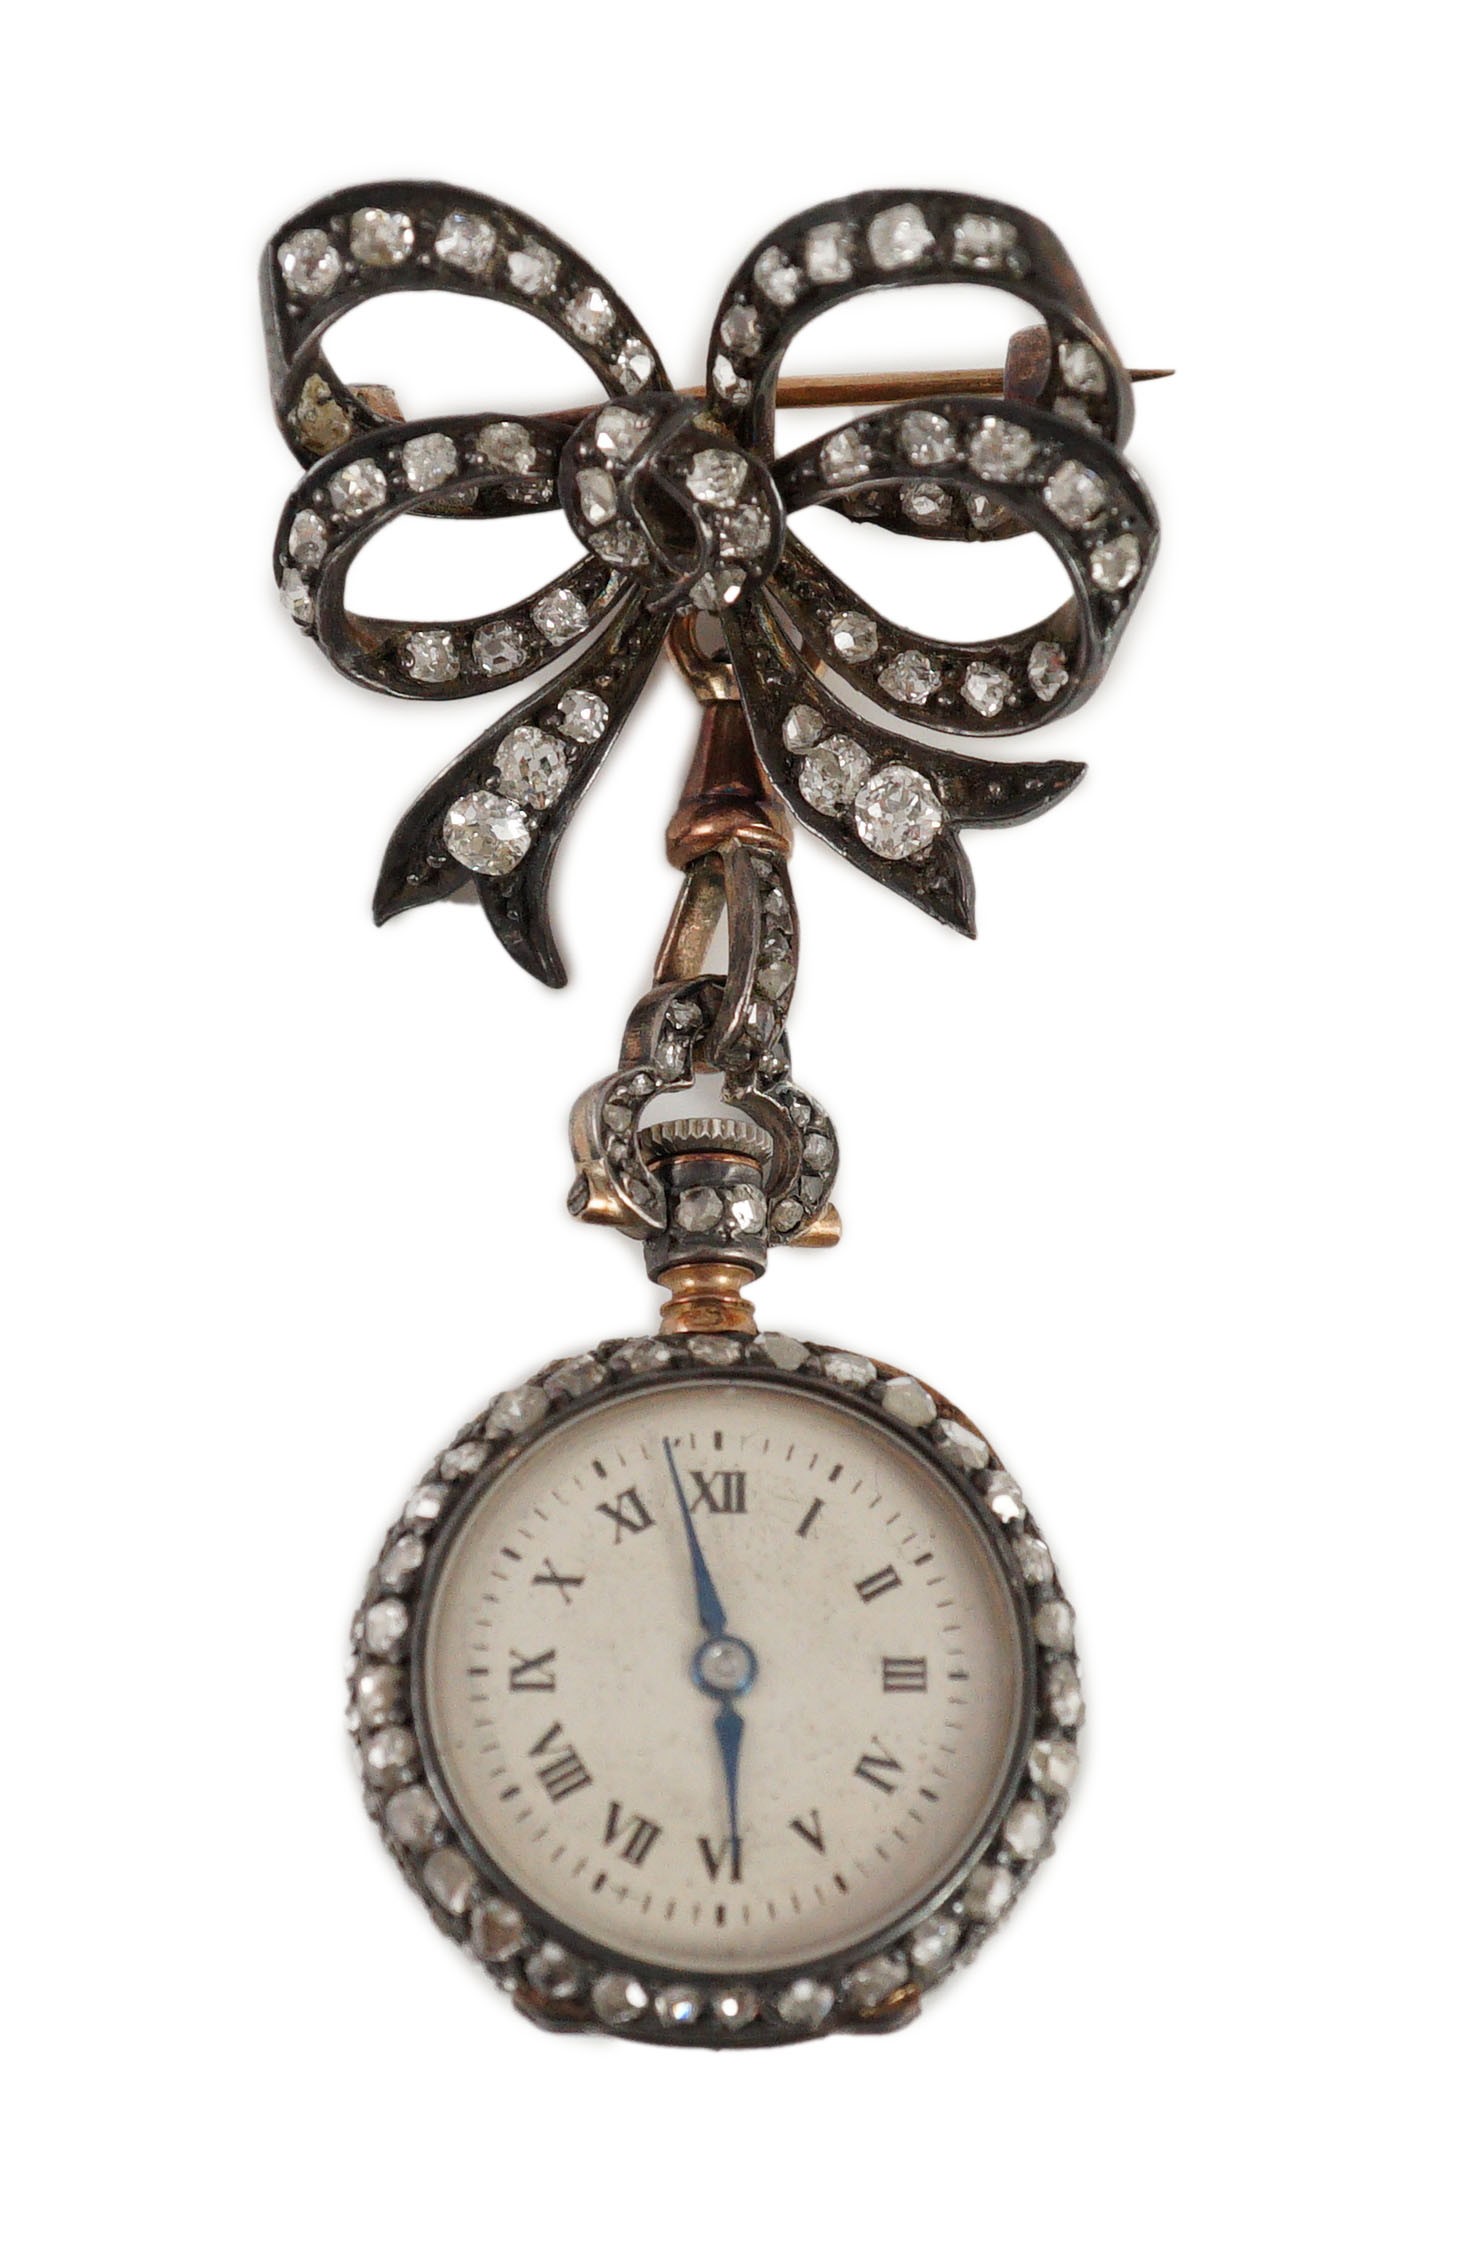 A late 19th century/early 20th century French 18ct gold and rose cut diamond encrusted fob lapel watch, on a rose cut diamond set ribbon bow suspension brooch